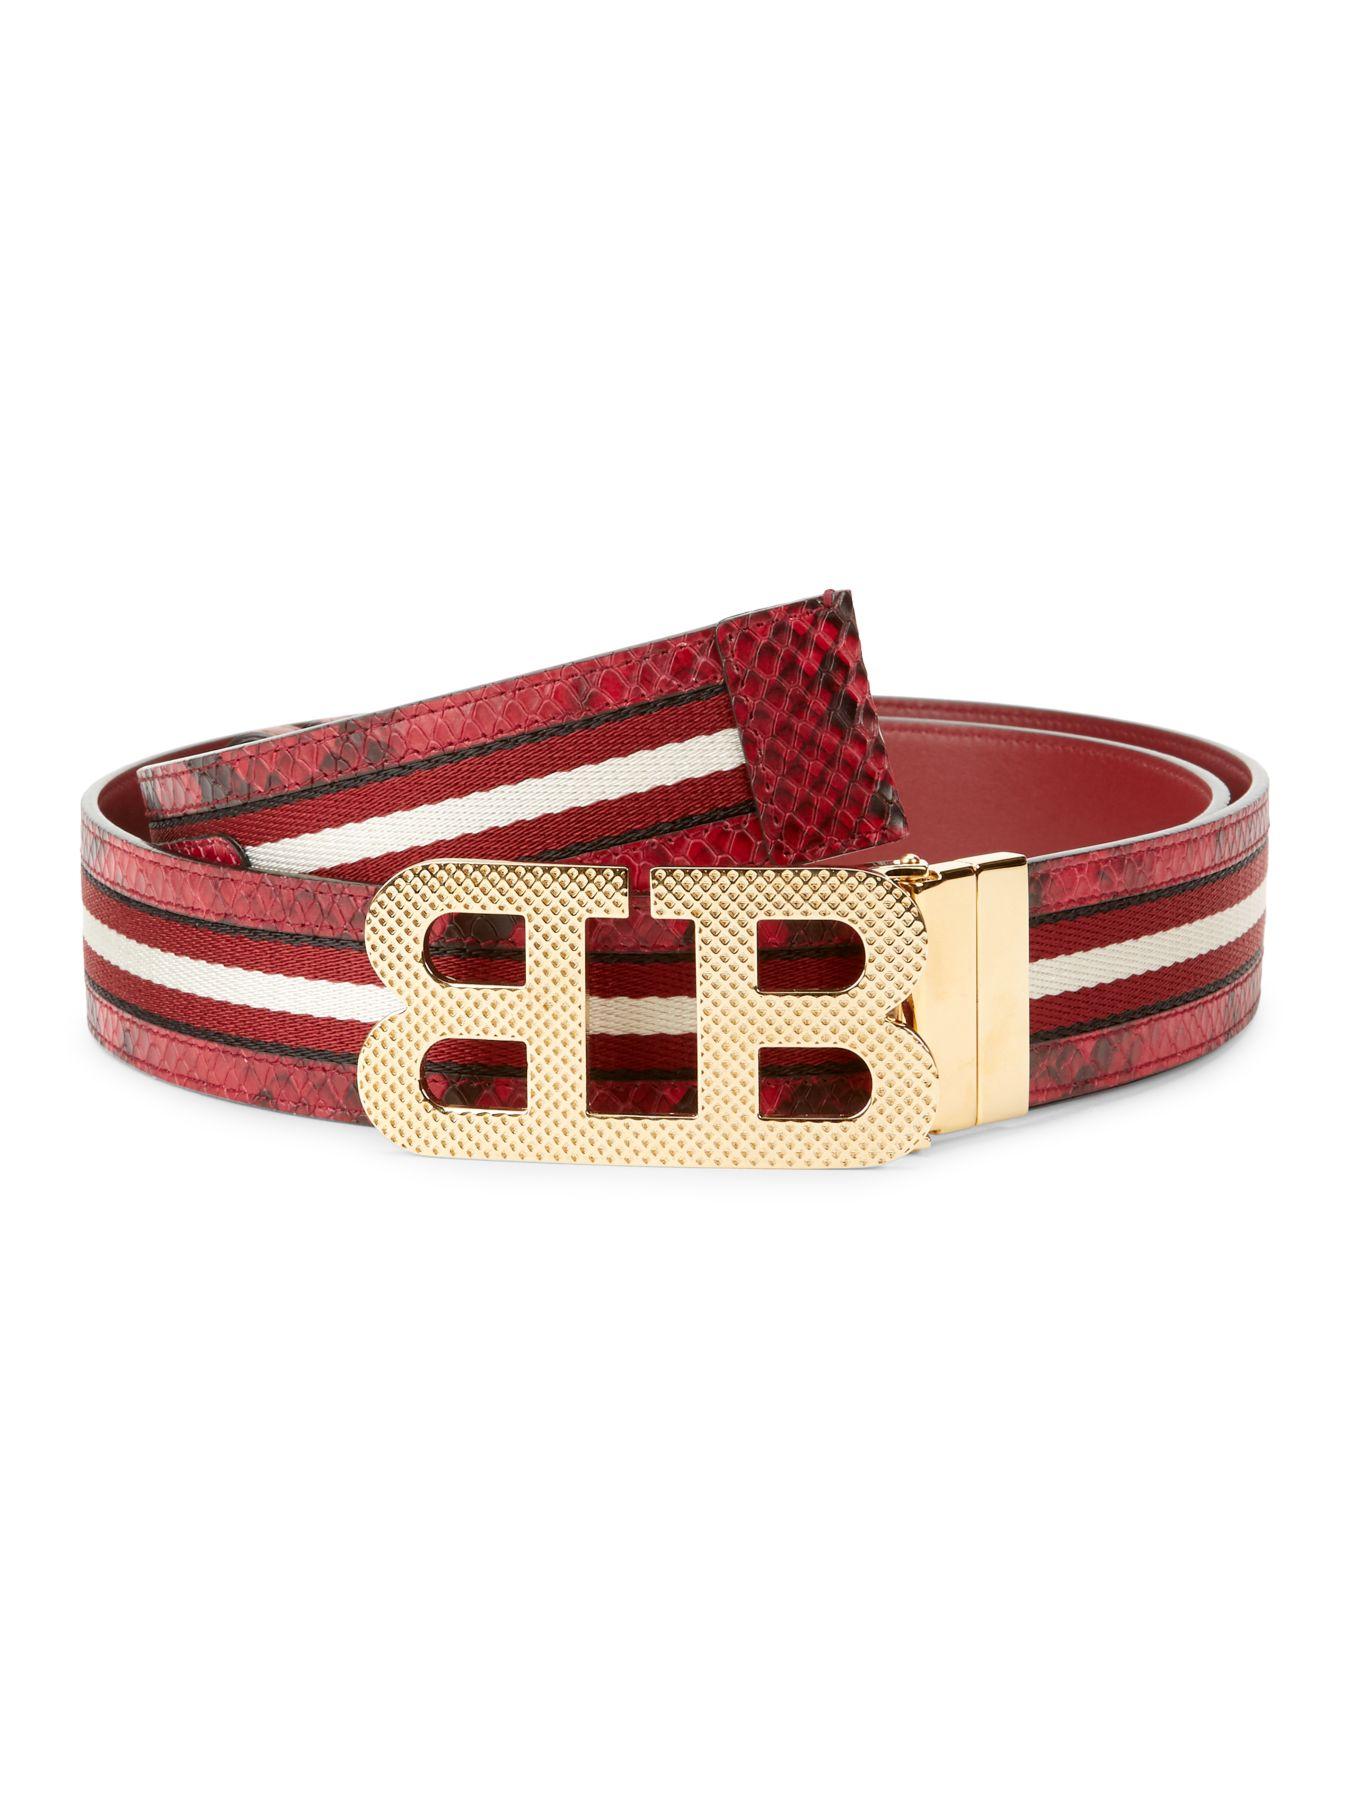 Bally Synthetic Iconic Buckle Mirror Stripe Belt in Red for Men - Lyst